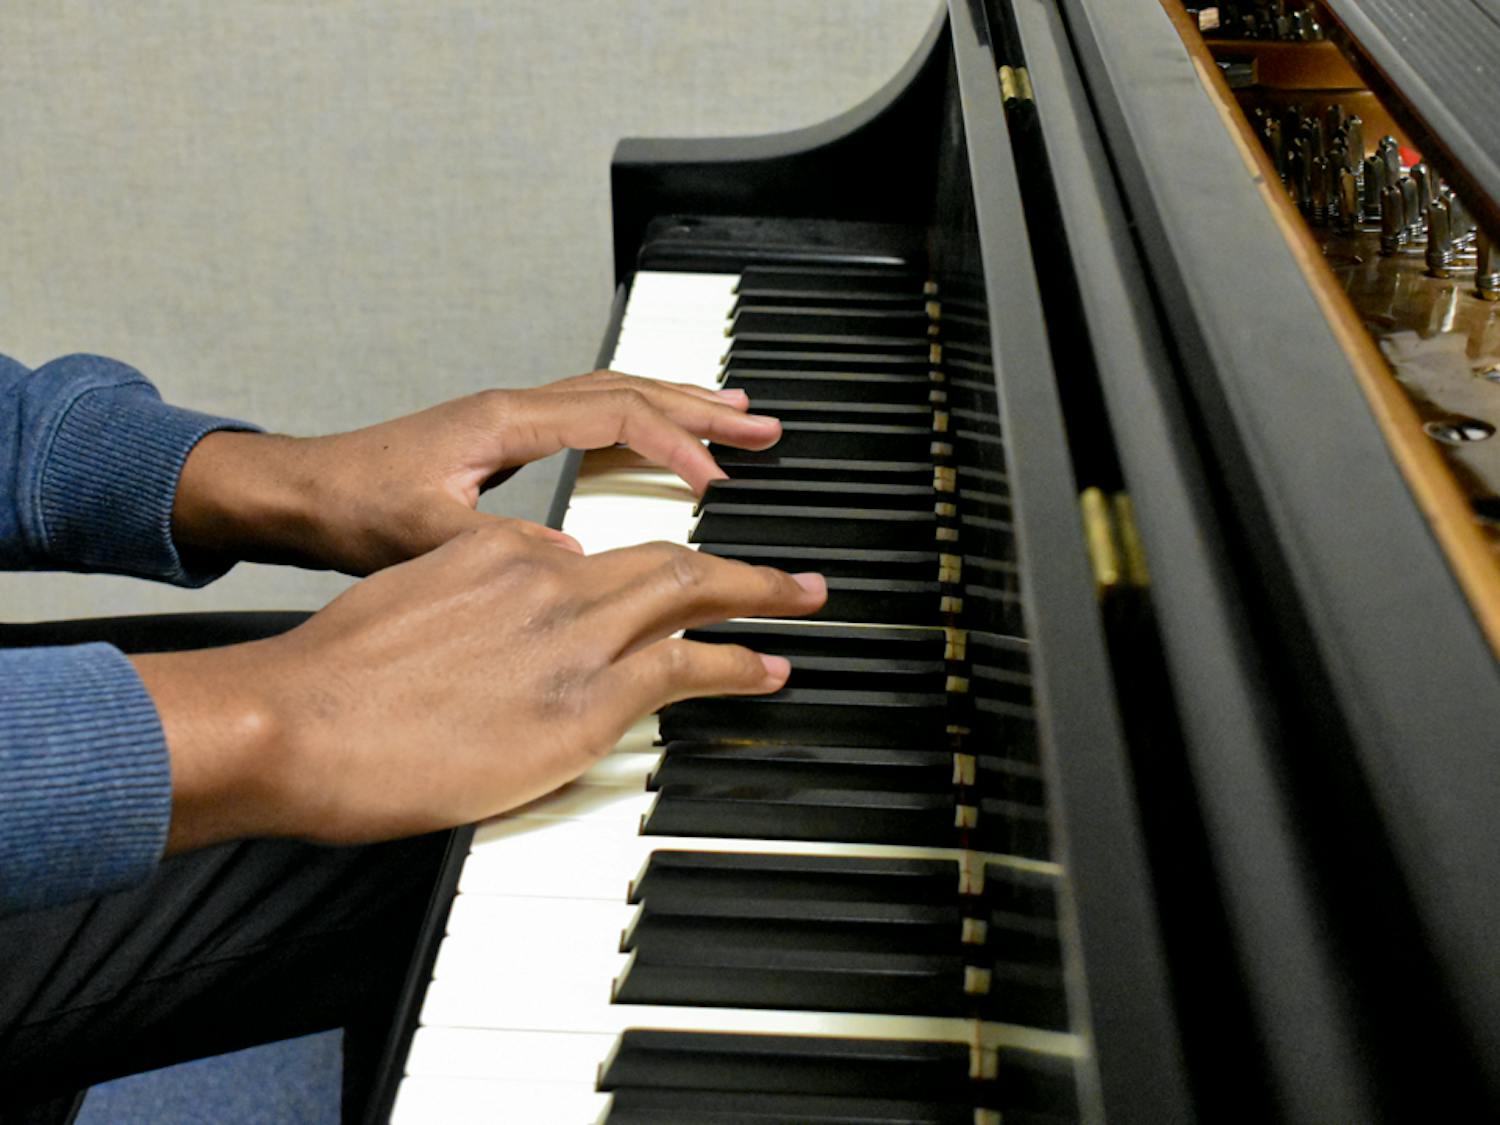 Second-year music industry studies student Donovan Medley rehearses on the classroom’s piano for the ensemble’s performance set for February 13, 2023. In professional music therapy settings, instruments are set up in a particular way for clients in order to be their most successful. They are deconstructed so that patients can learn the basics and grow as they practice.